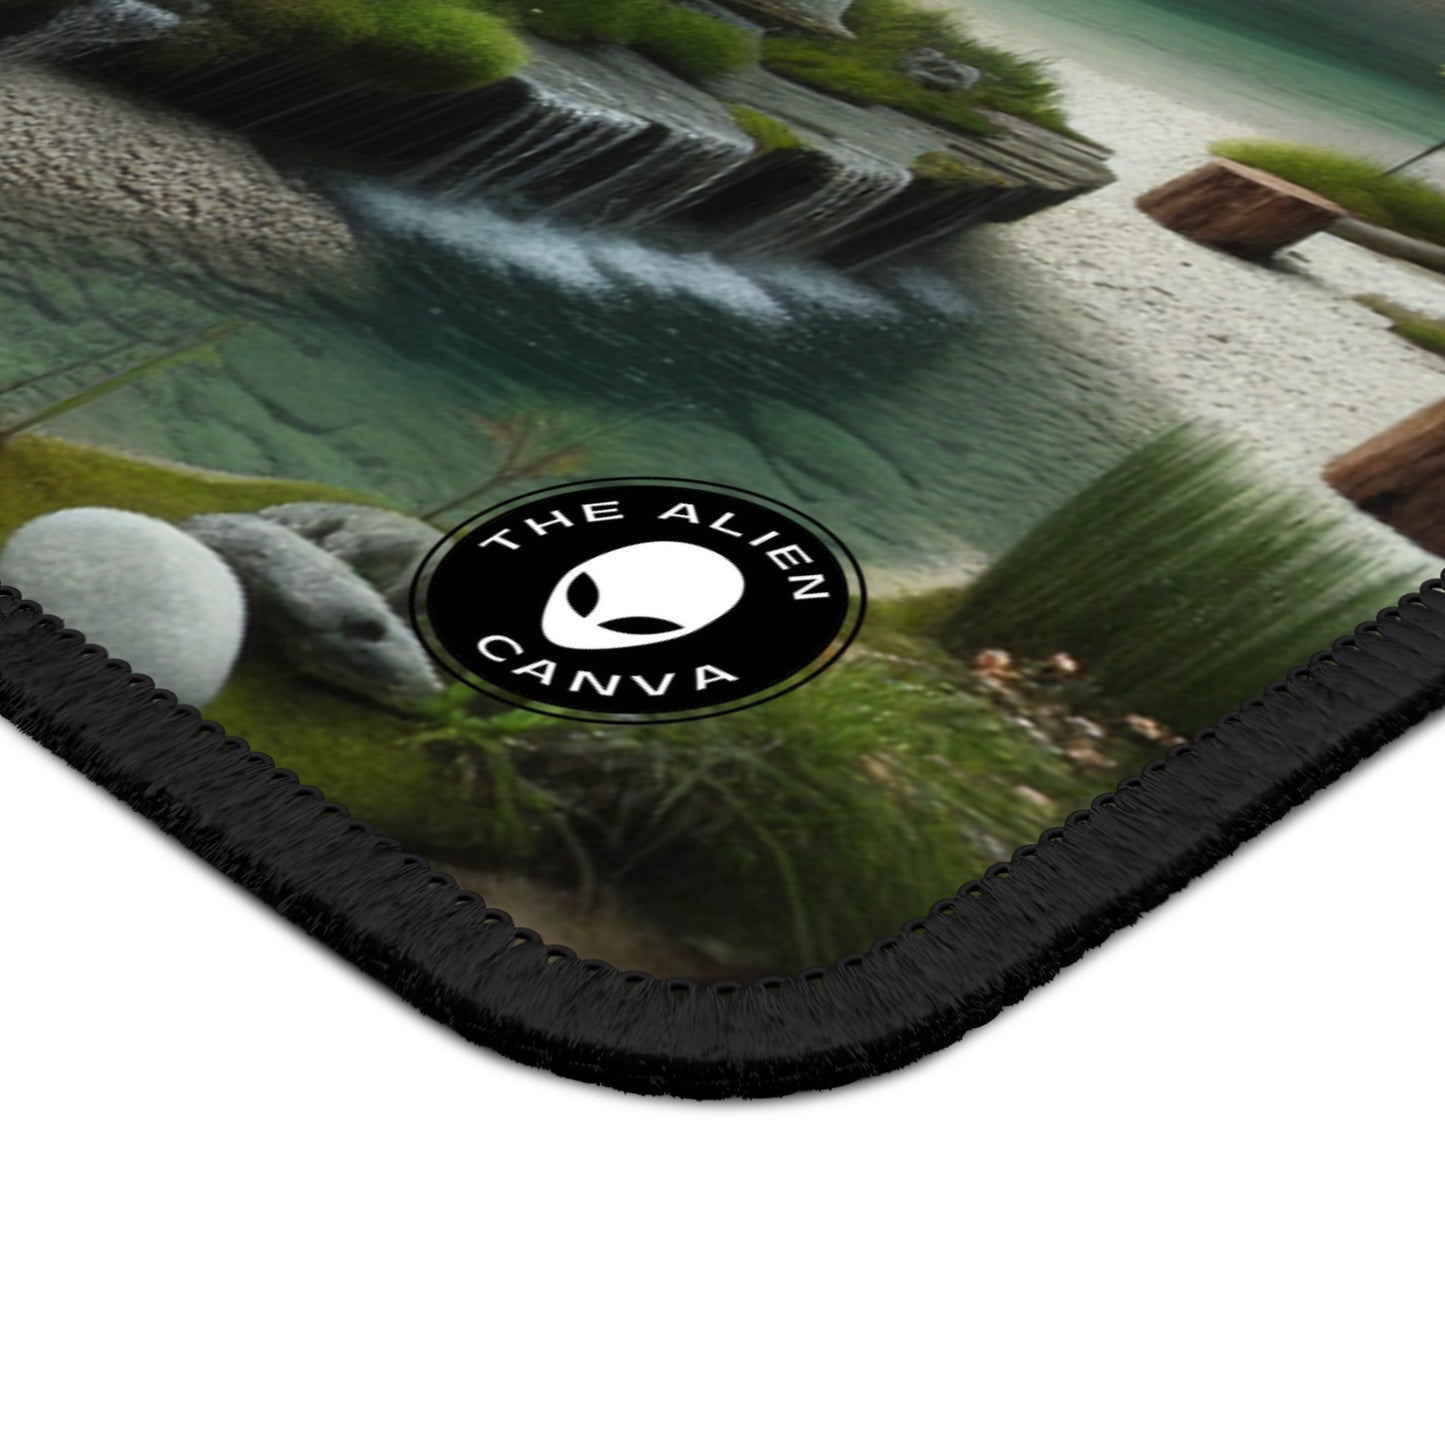 "Renewal Recycled: An Interactive Environmental Sculpture" - The Alien Gaming Mouse Pad Environmental Sculpture